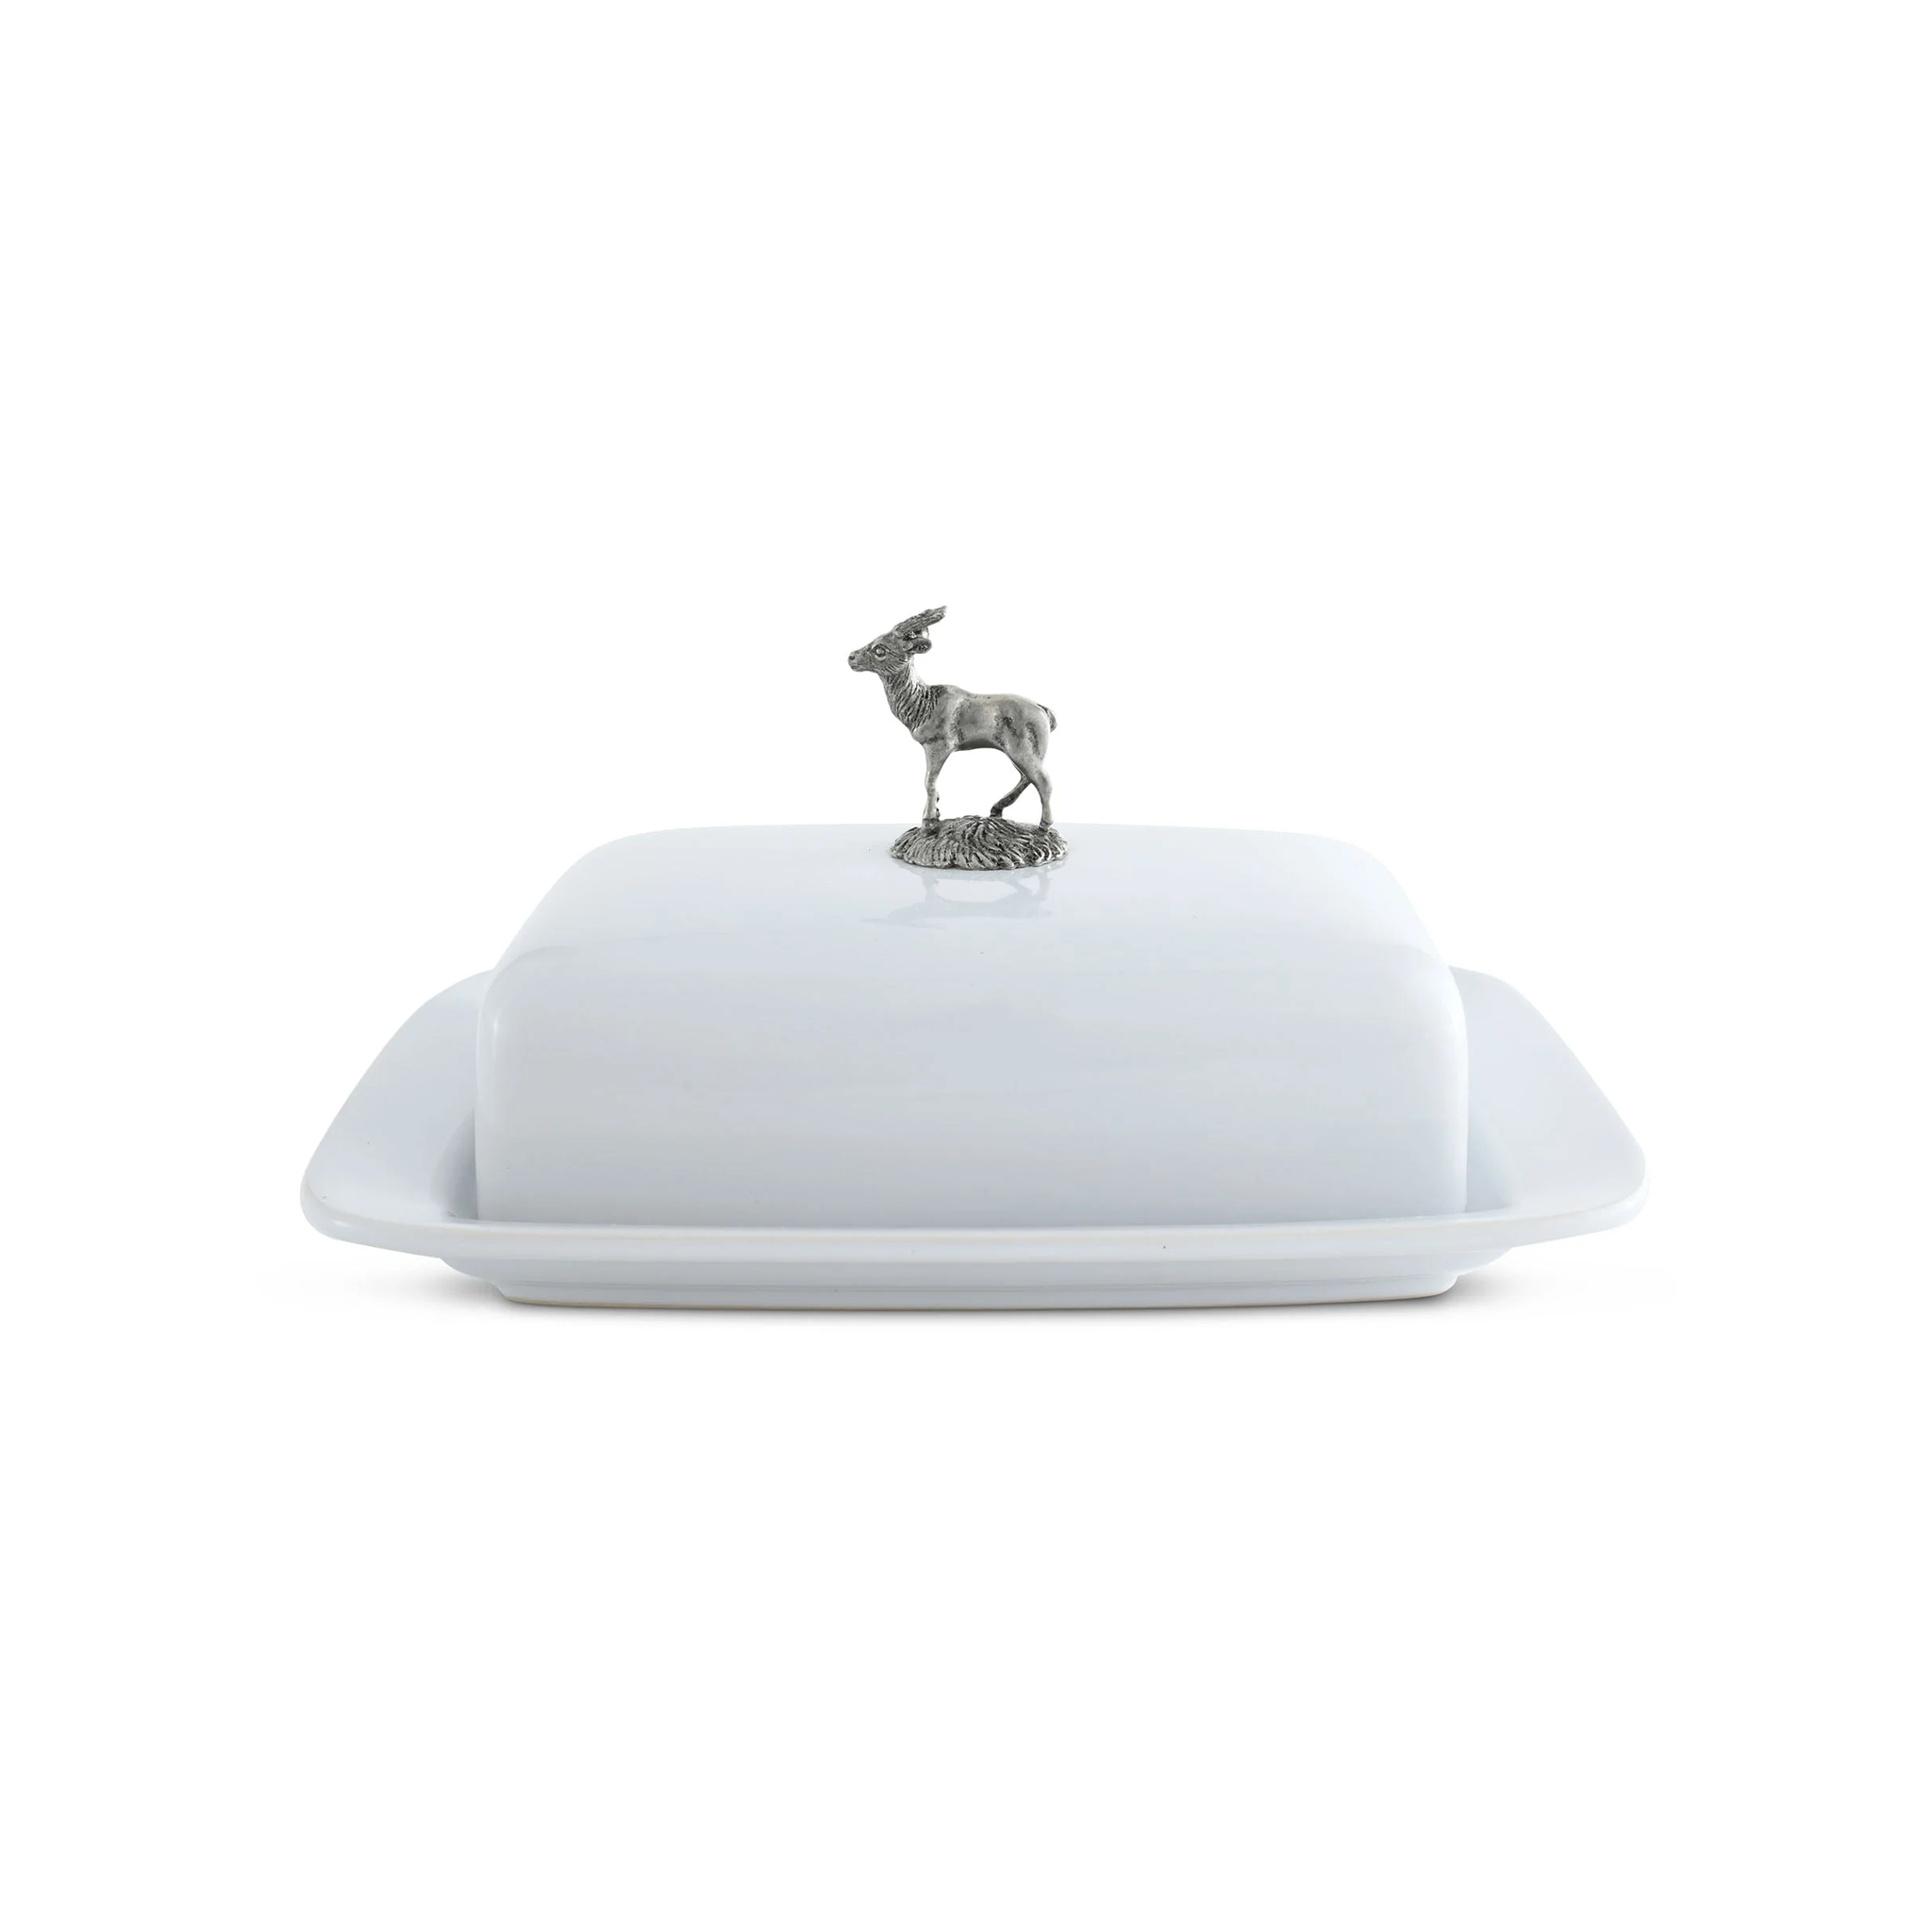 a white platter with a deer figurine on top of it